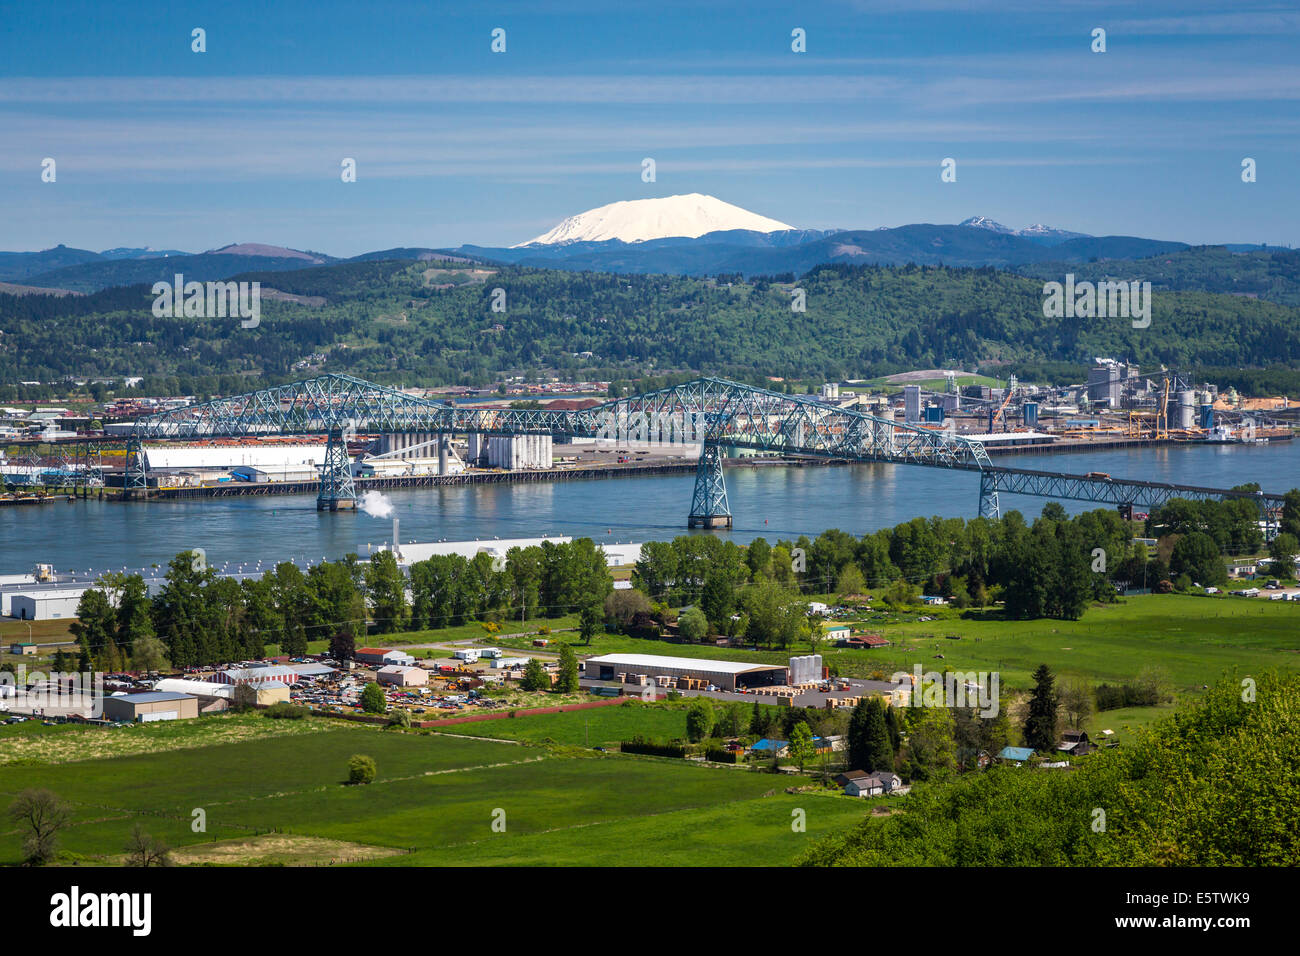 Pulp and paper industry along the Columbia River near Longview, Washington, USA. Stock Photo